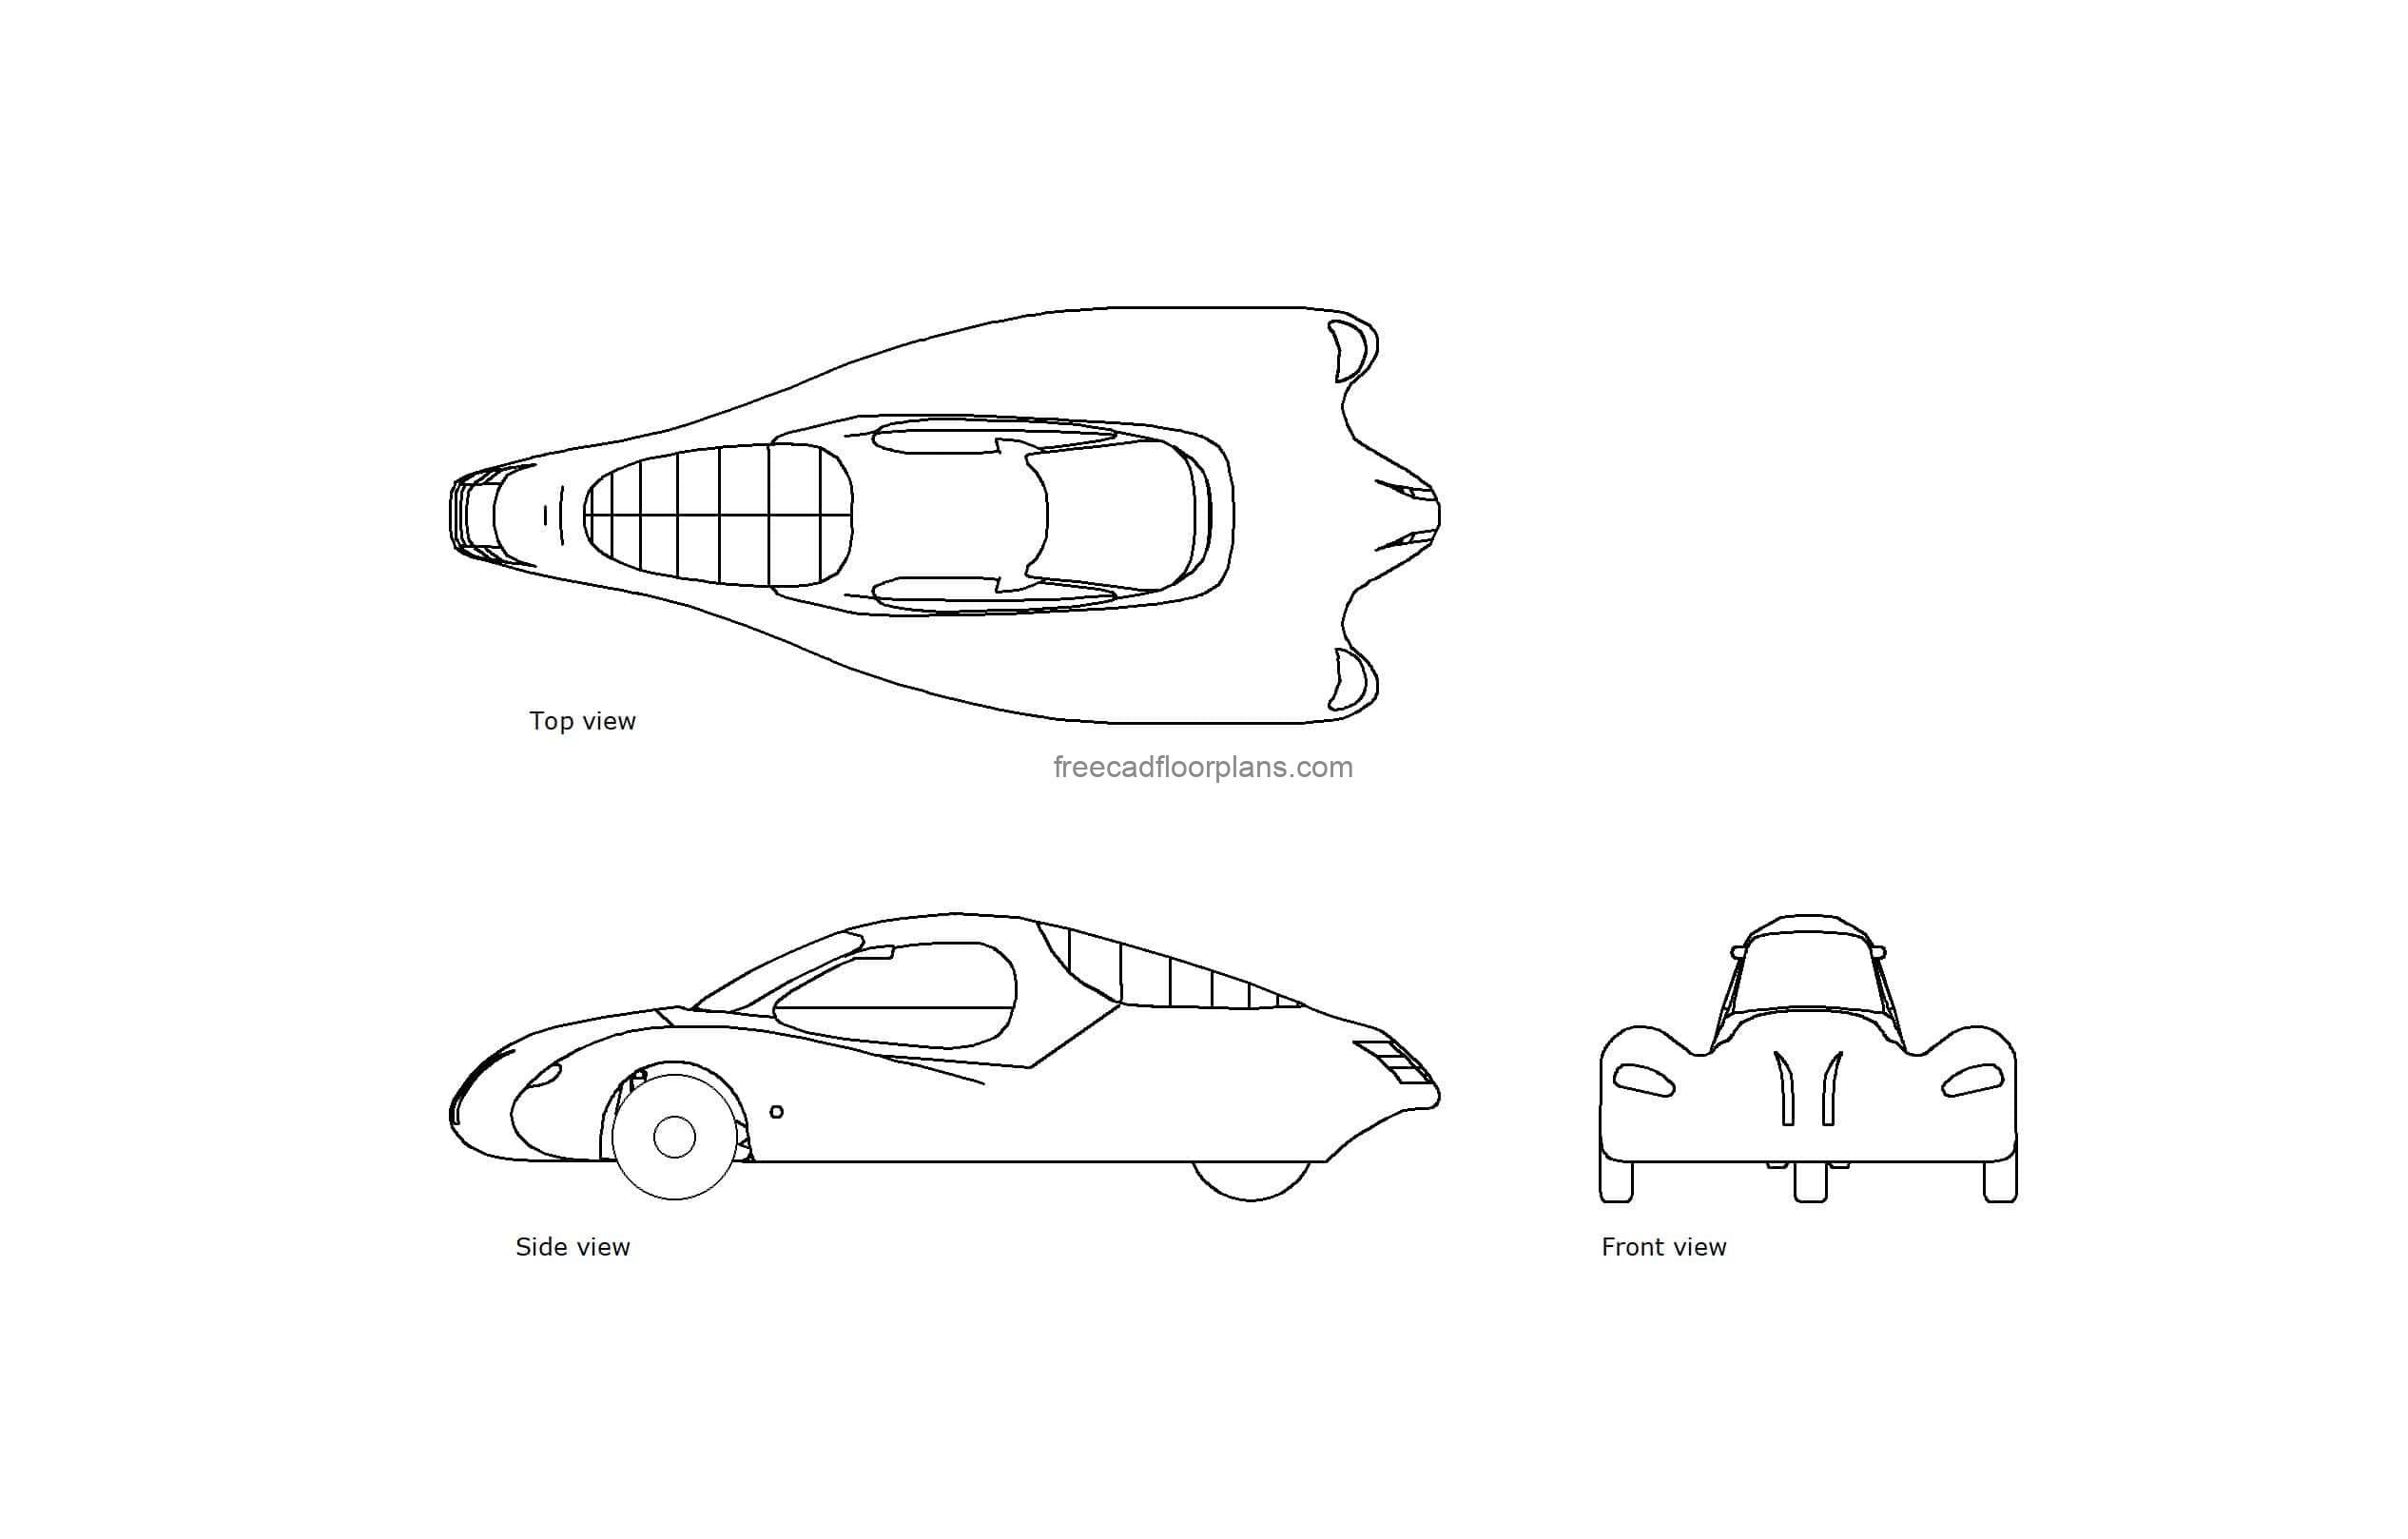 autocad drawing of a supermileage vehicle, plan and elevation 2d views, dwg file free for download